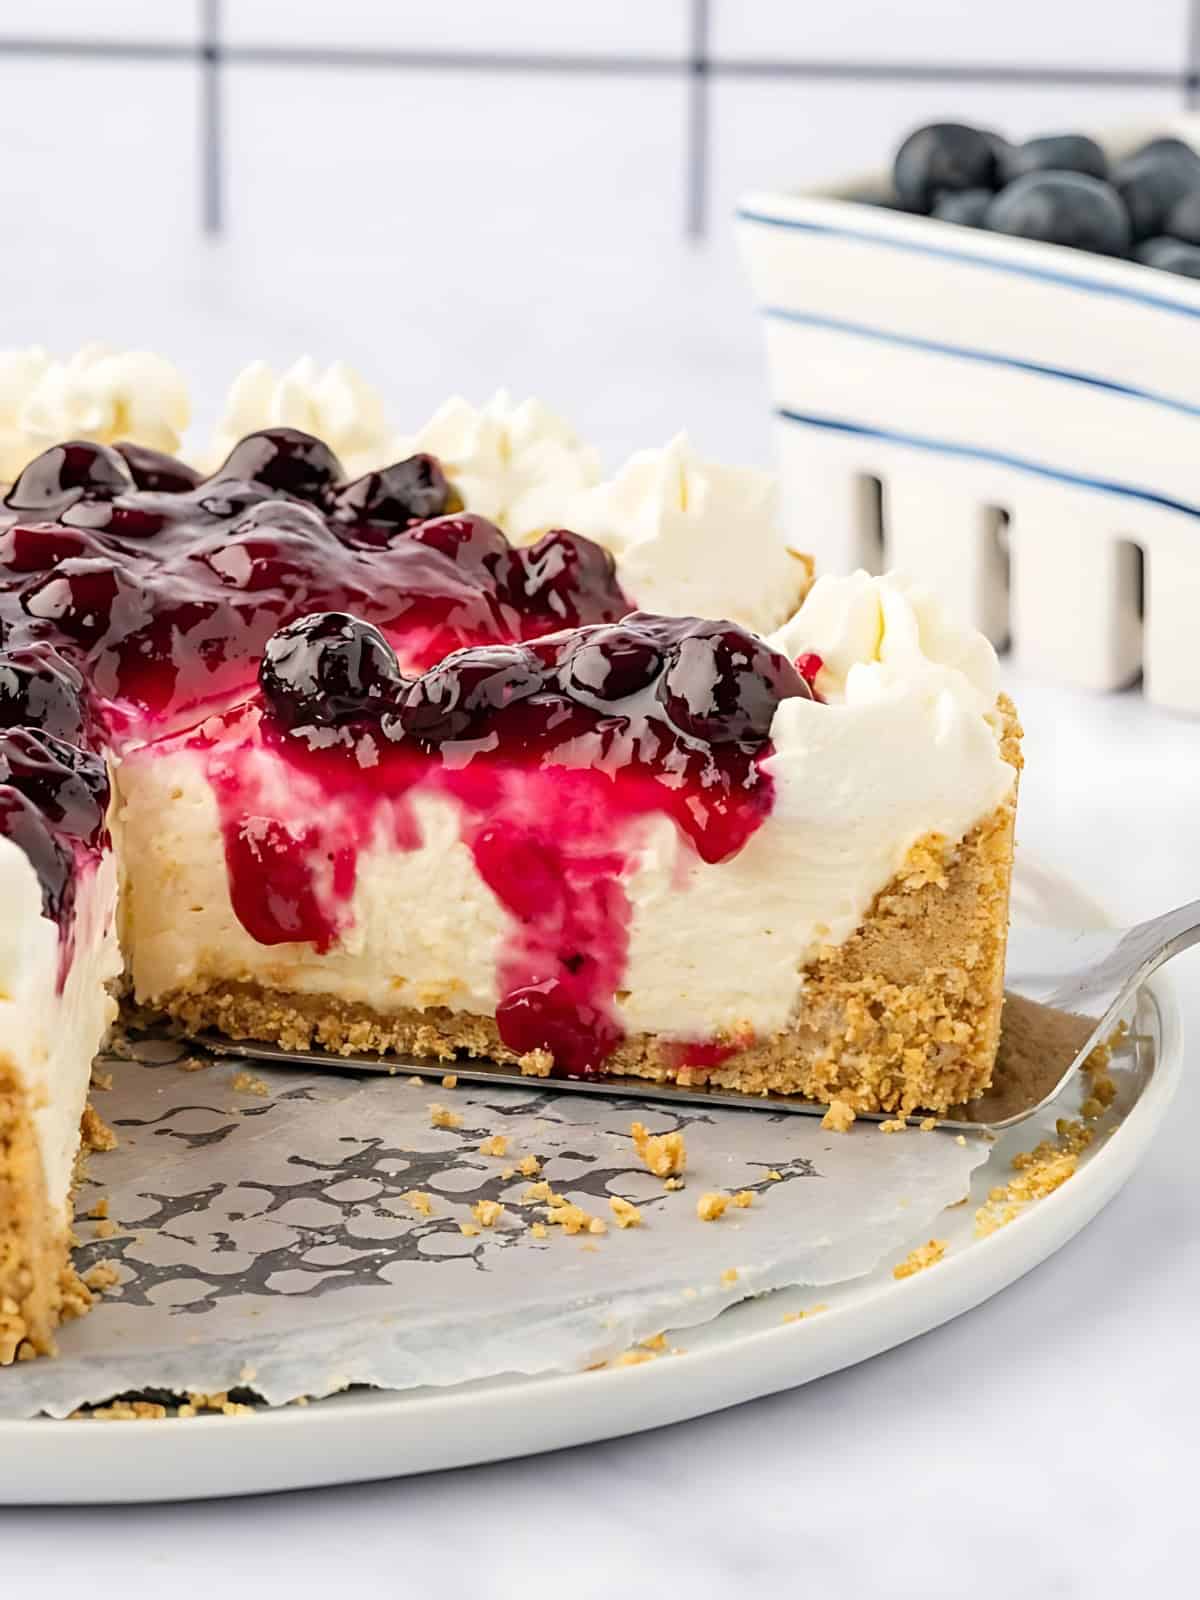 No bake cheesecake with berries on top.